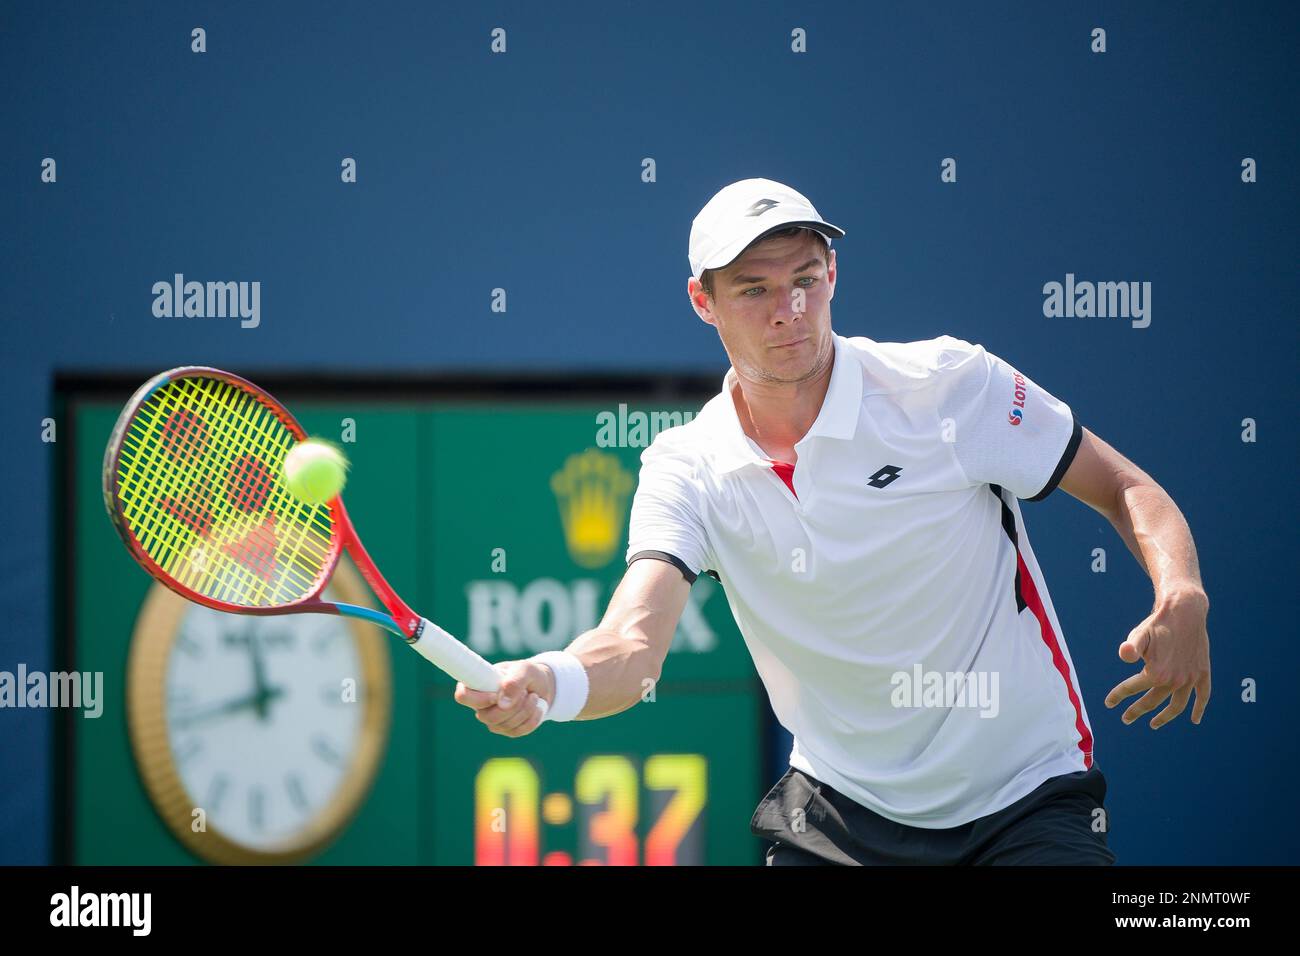 Kamil Majchrzak in action during a qualifying match at the 2021 US Open, Thursday, Aug